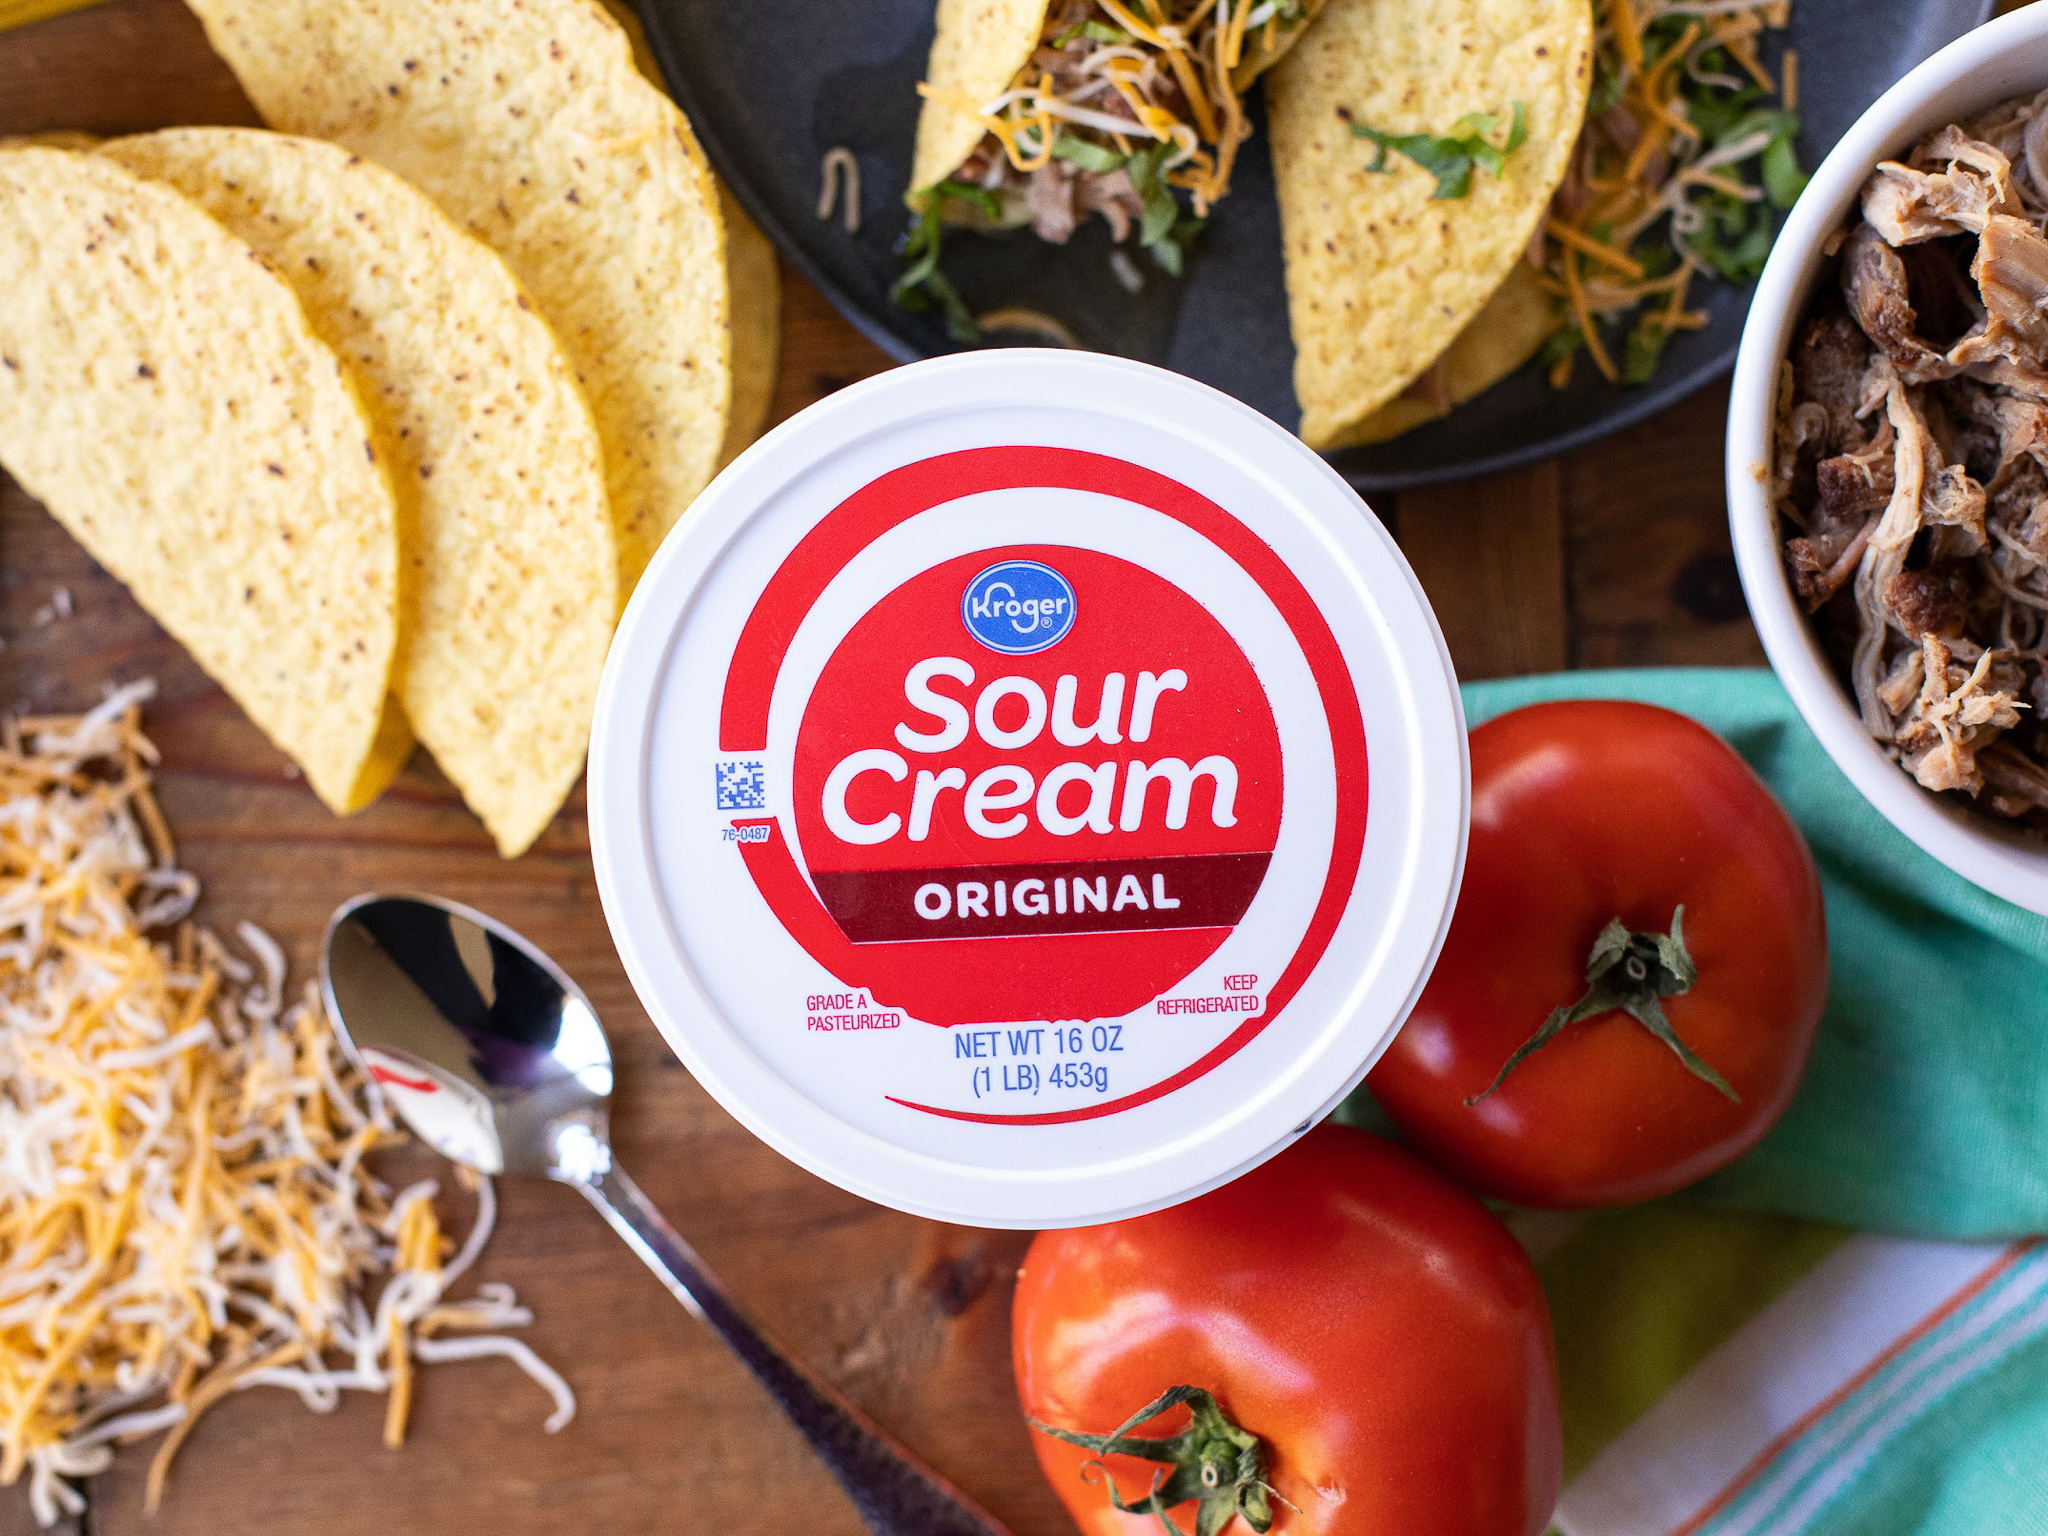 Score Kroger Brand Sour Cream, Dips, Or Cottage Cheese For Just $1.49 This Week